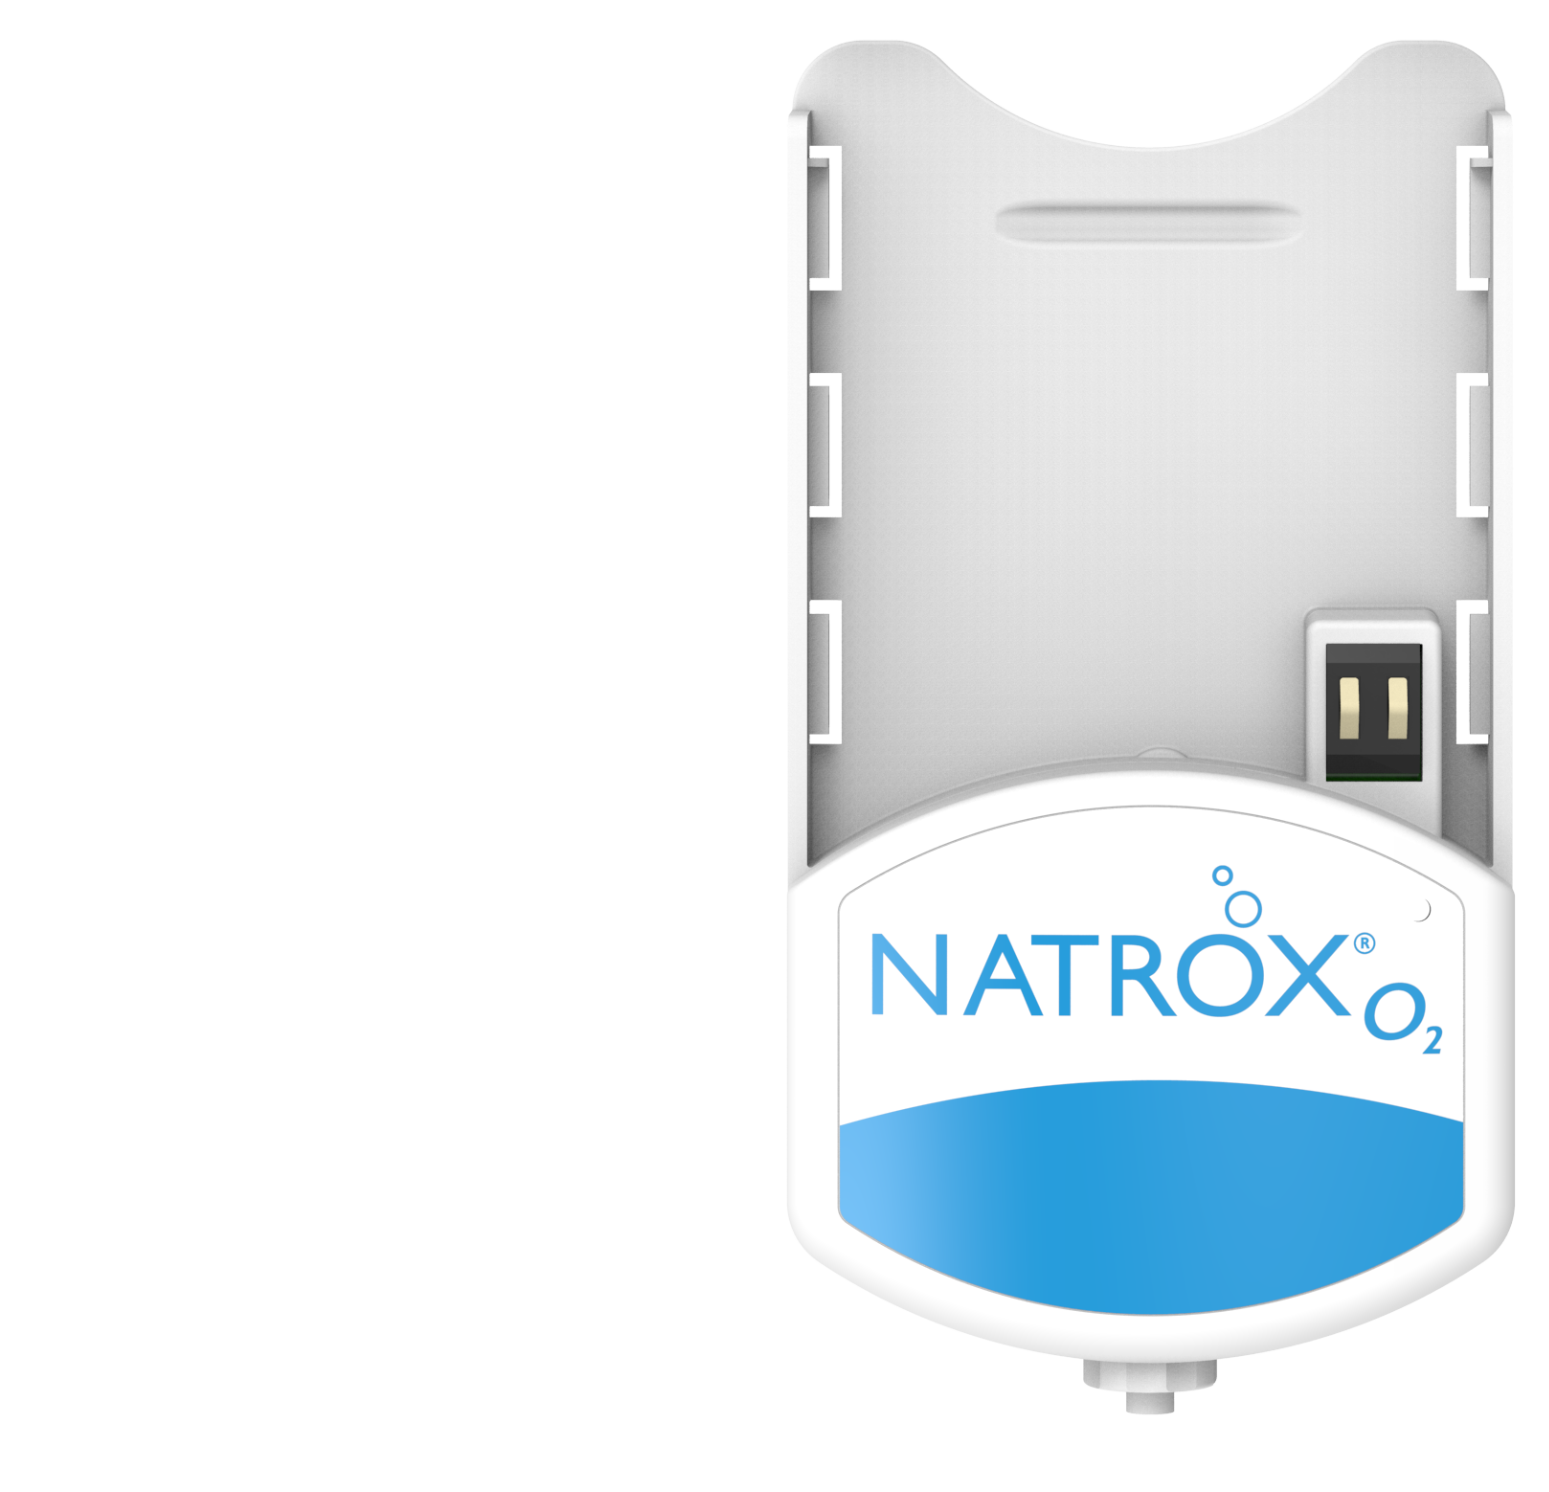 The battery compartment of the NATROX® O₂ is a topical oxygen therapy device